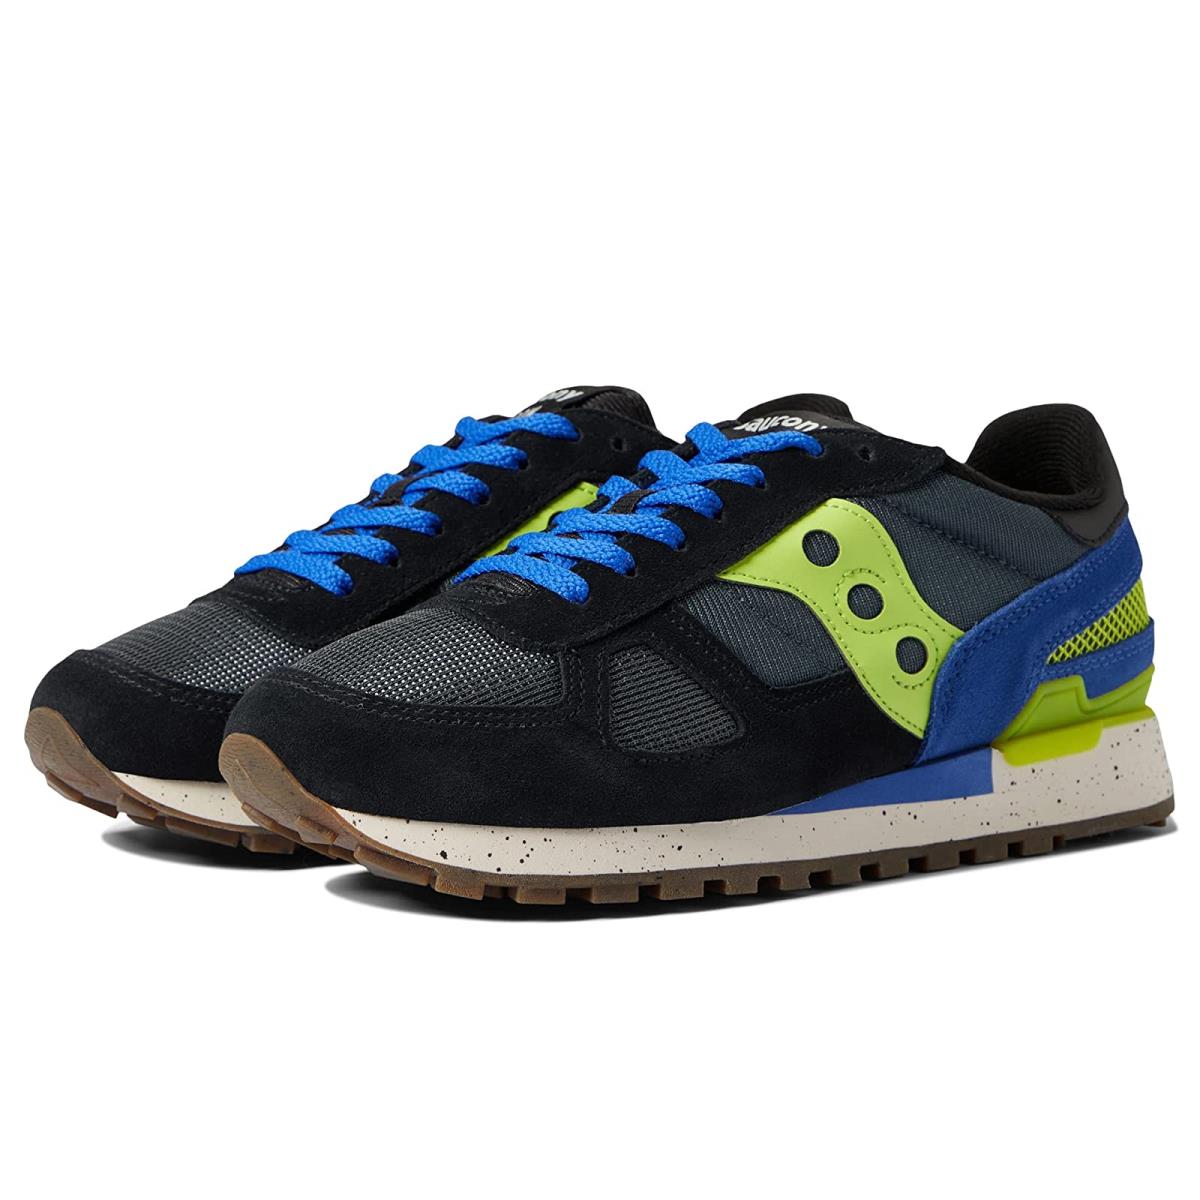 Unisex Sneakers Athletic Shoes Saucony s Shadow Black/Lime/Blue